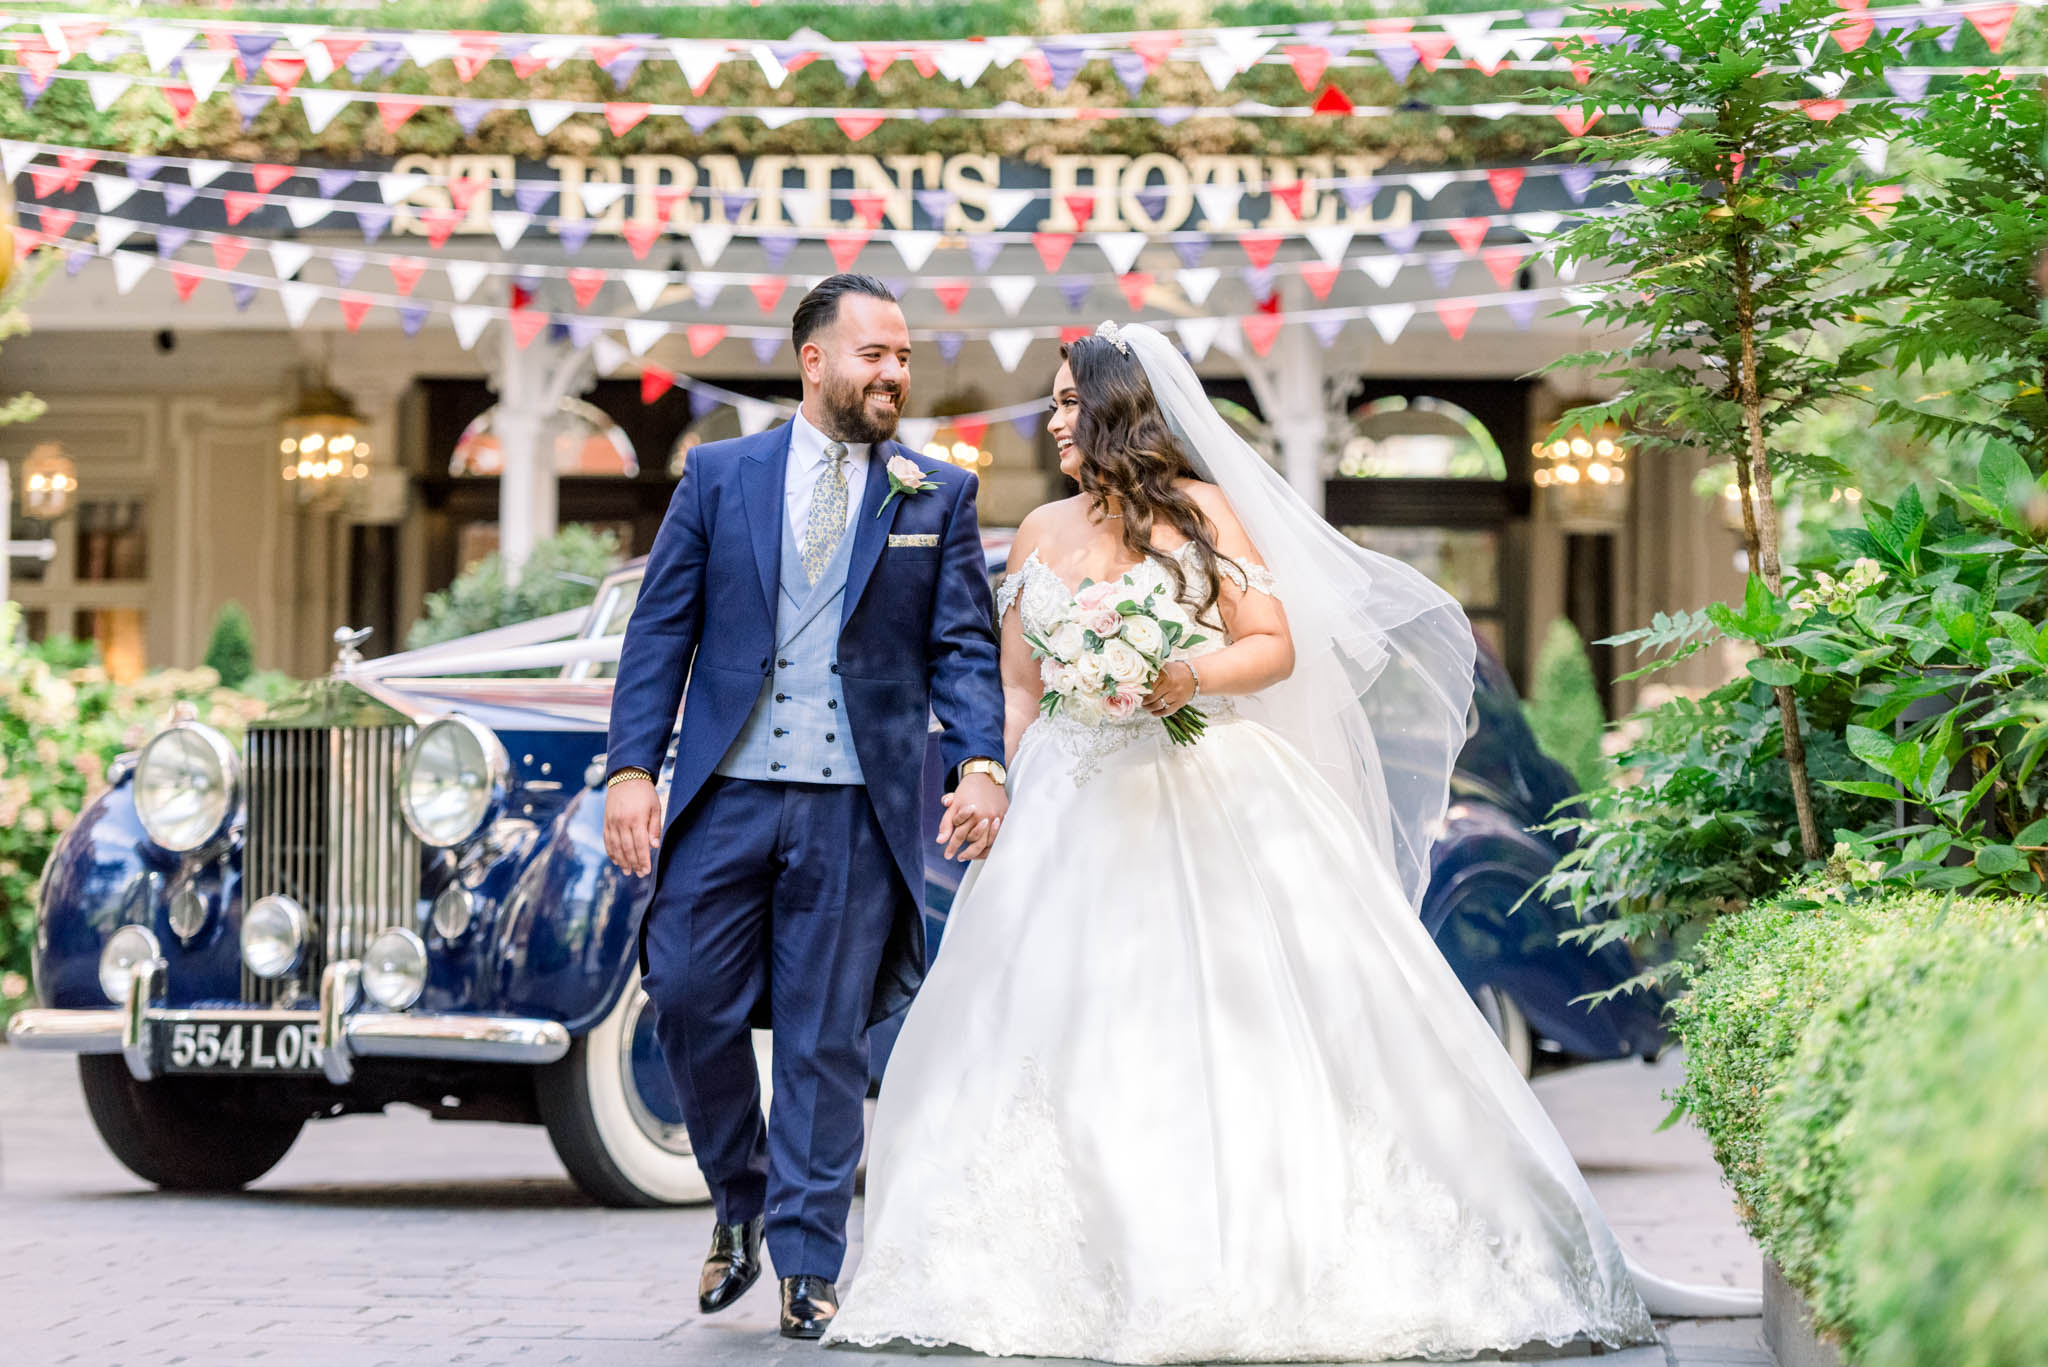 https://usercontent.one/wp/www.natalieandmax.co.uk/wp-content/uploads/2022/09/S-J-Natalie-and-Max-Photo-and-Films-St.-Ermins-Hotel-Wedding-Photography-480.jpg?media=1654418125